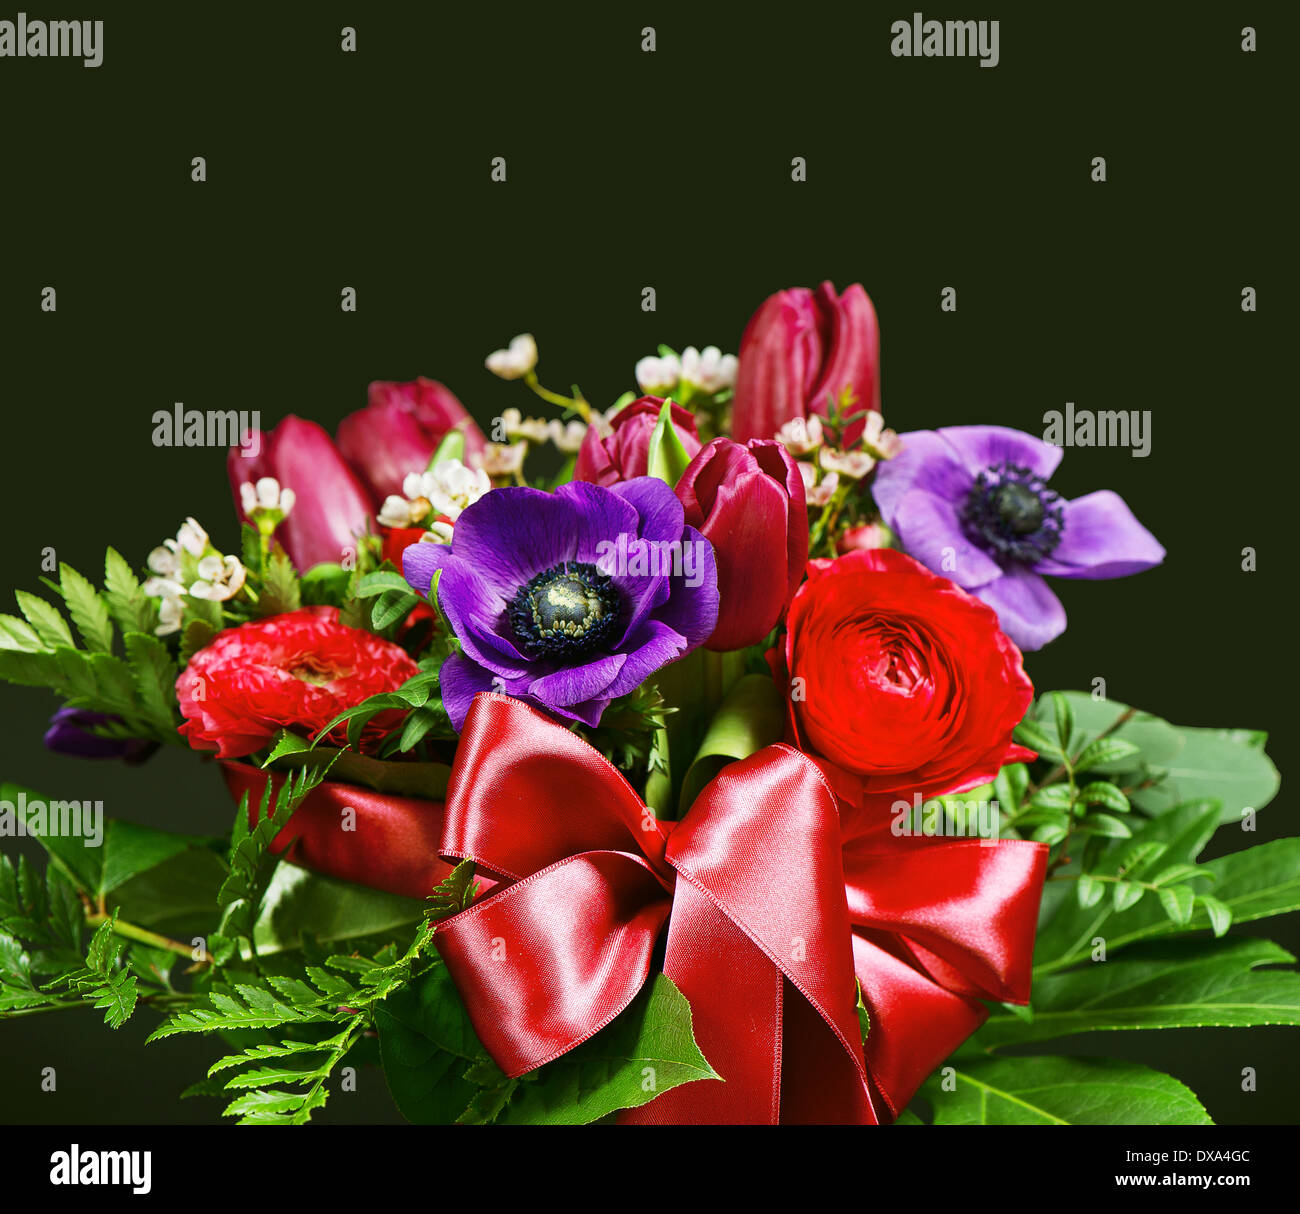 colorful spring flowers Stock Photo - Alamy